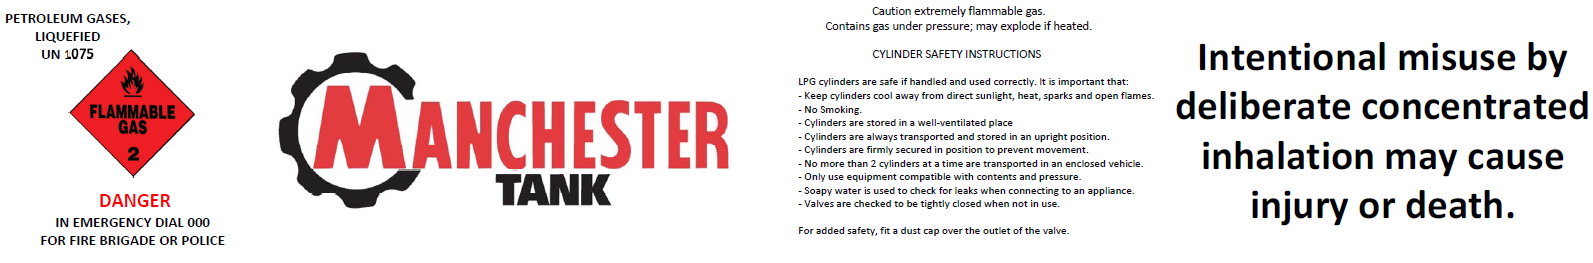 Compliant gas cylinder label - Manchester